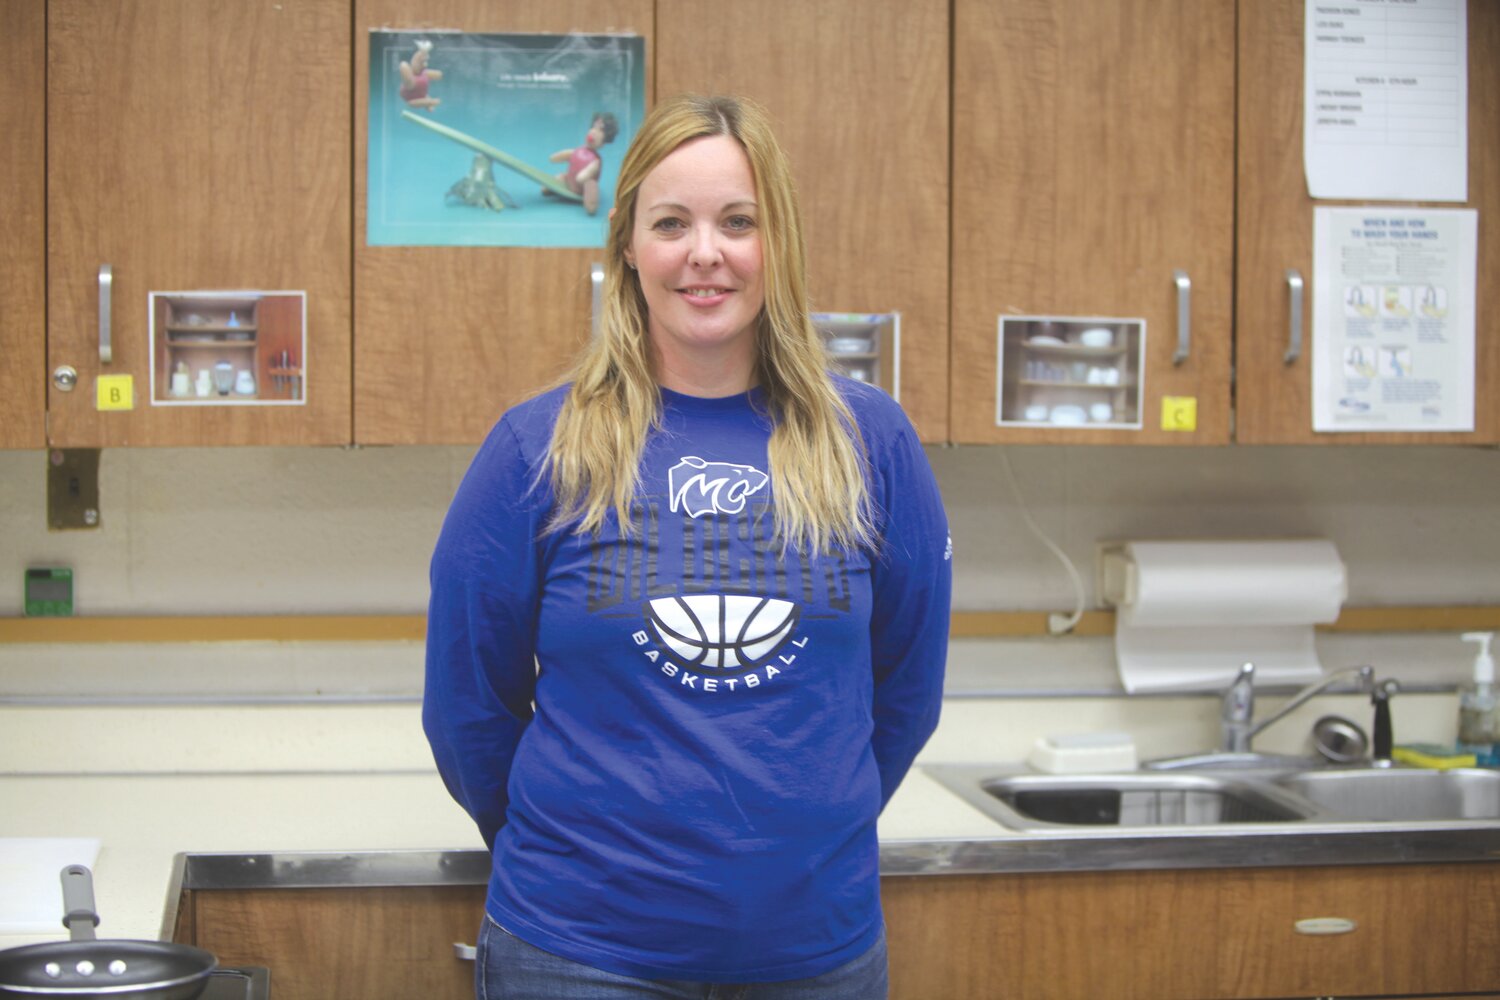 Montgomery County High School family and consumer science teacher Beth Beattie was named recipient of the Missouri Association of Career and Technical Education Carl Perkins’ Community Service Award.